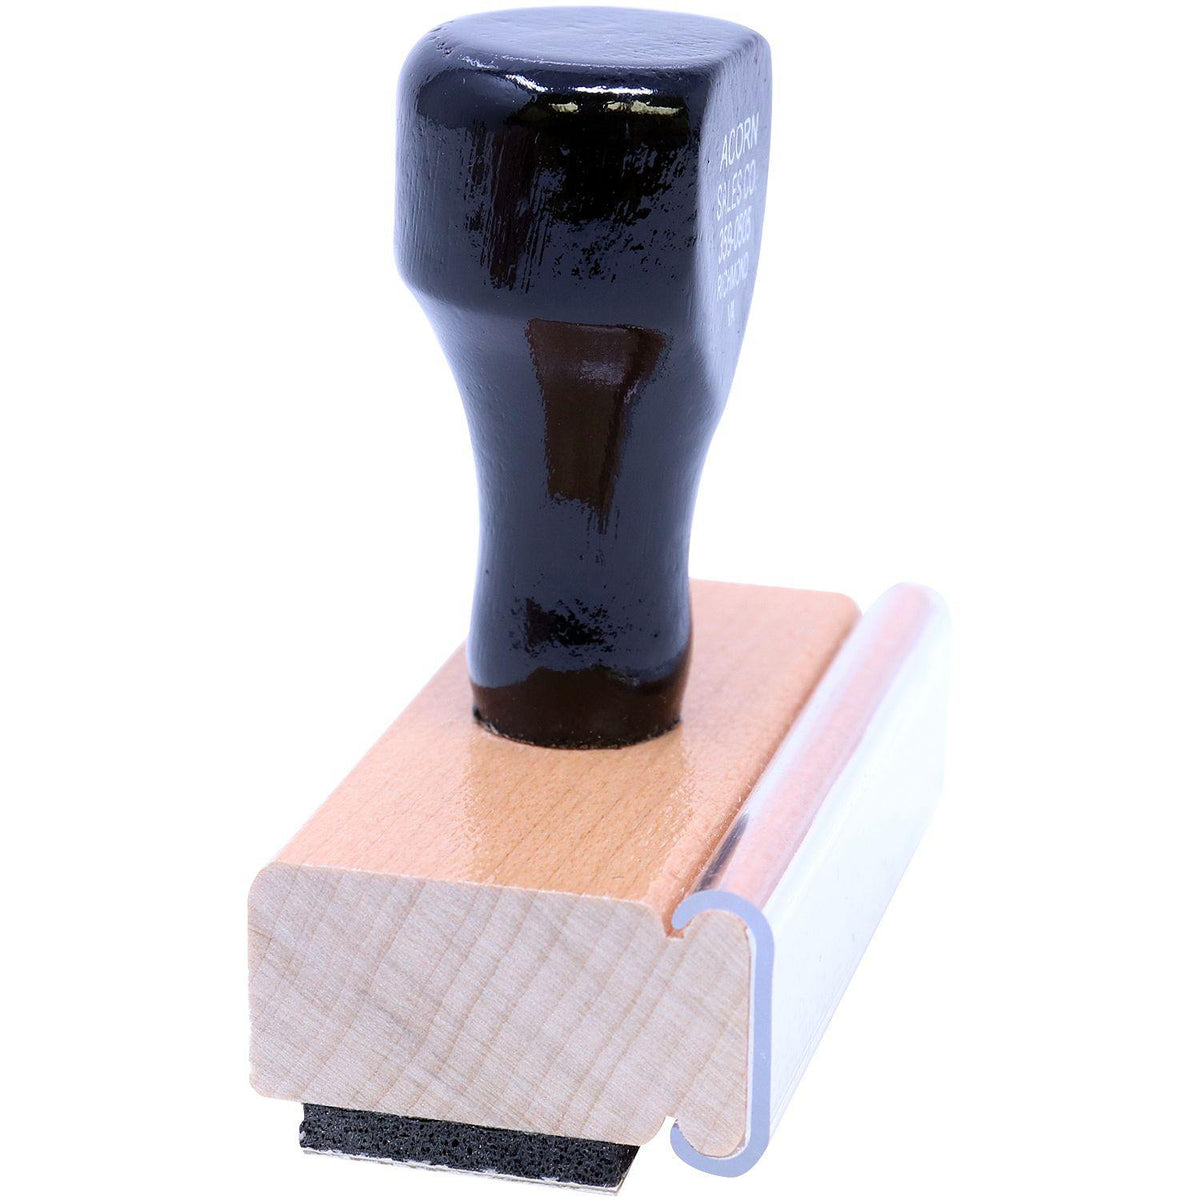 Large Terrific Rubber Stamp - Engineer Seal Stamps - Brand_Acorn, Impression Size_Large, Stamp Type_Regular Stamp, Type of Use_Teacher